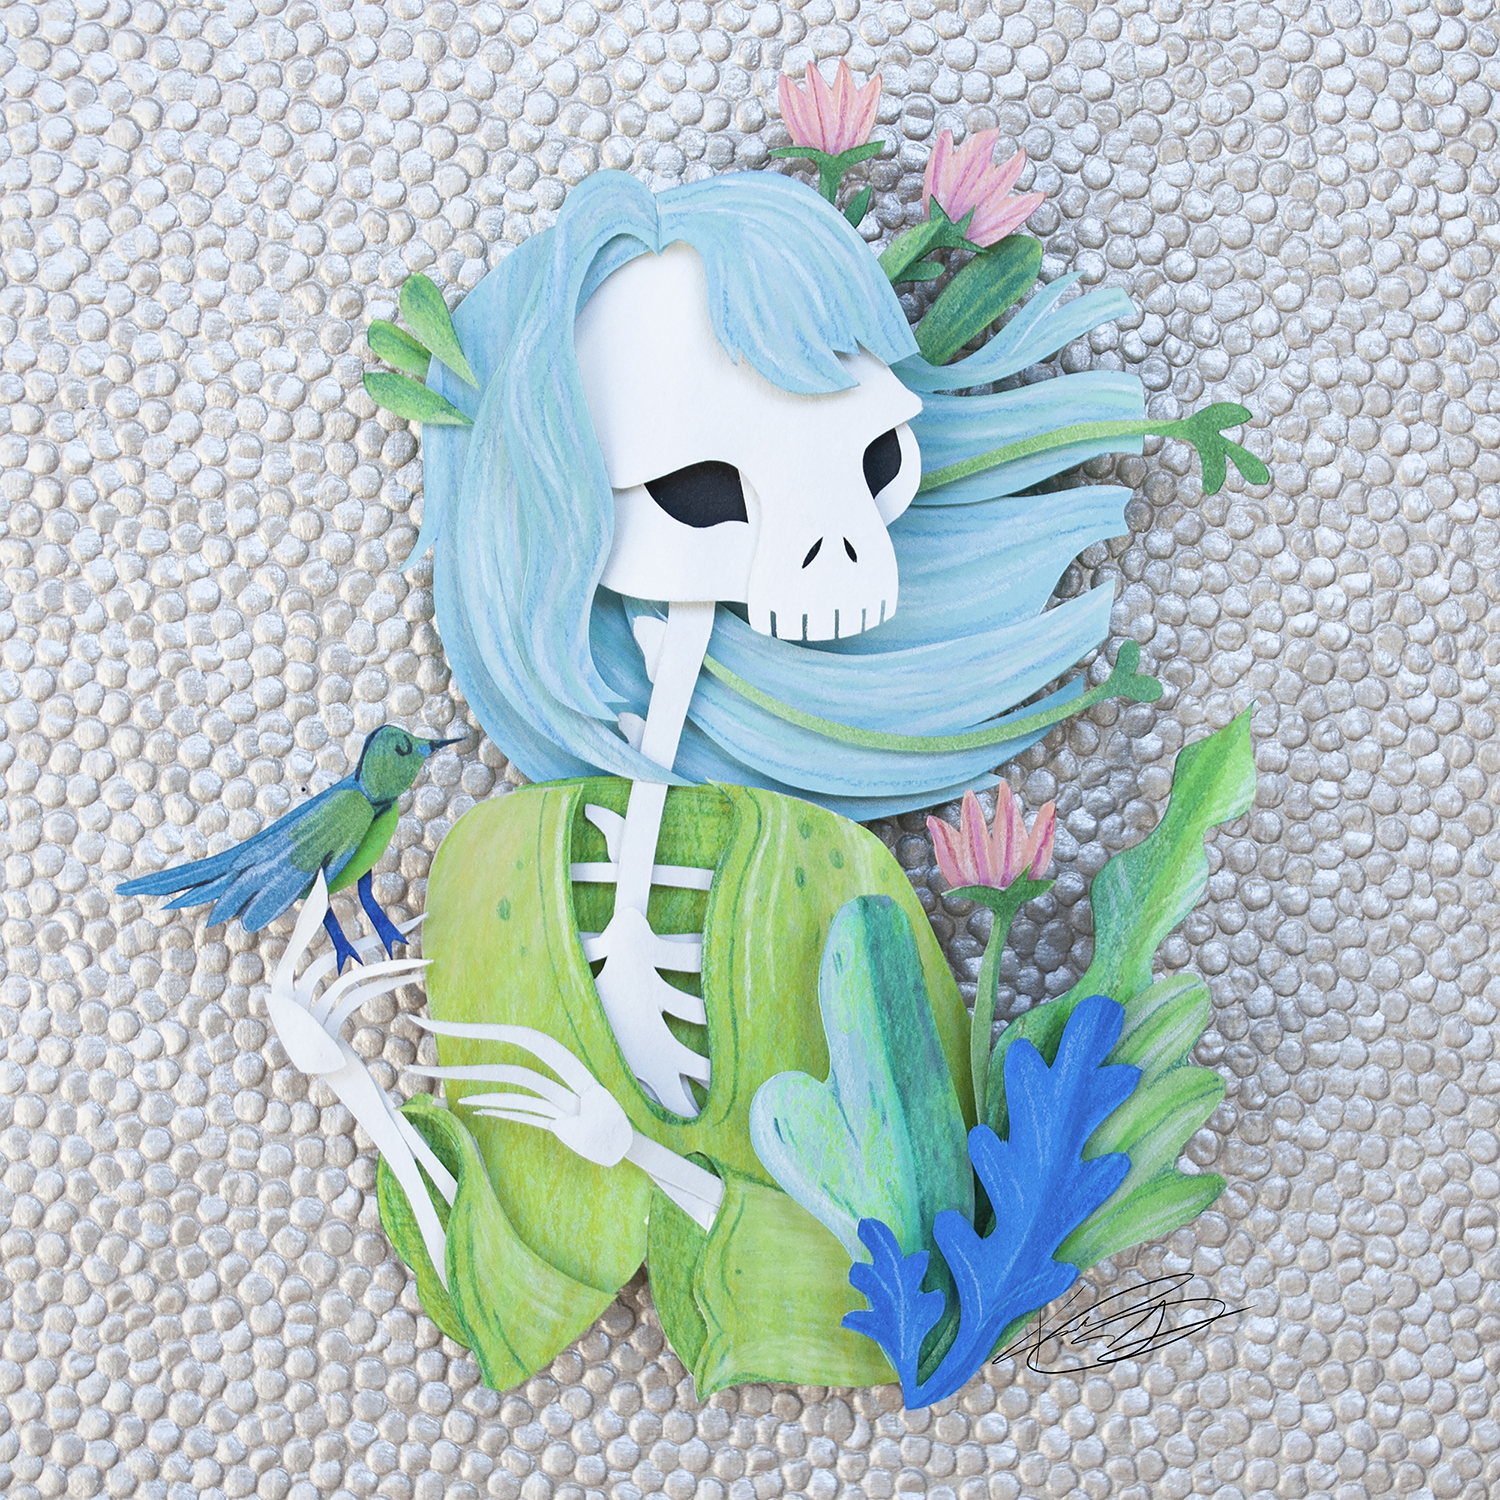 Cut paper skeleton girl with flowers blooming around her and a bird on her hand.